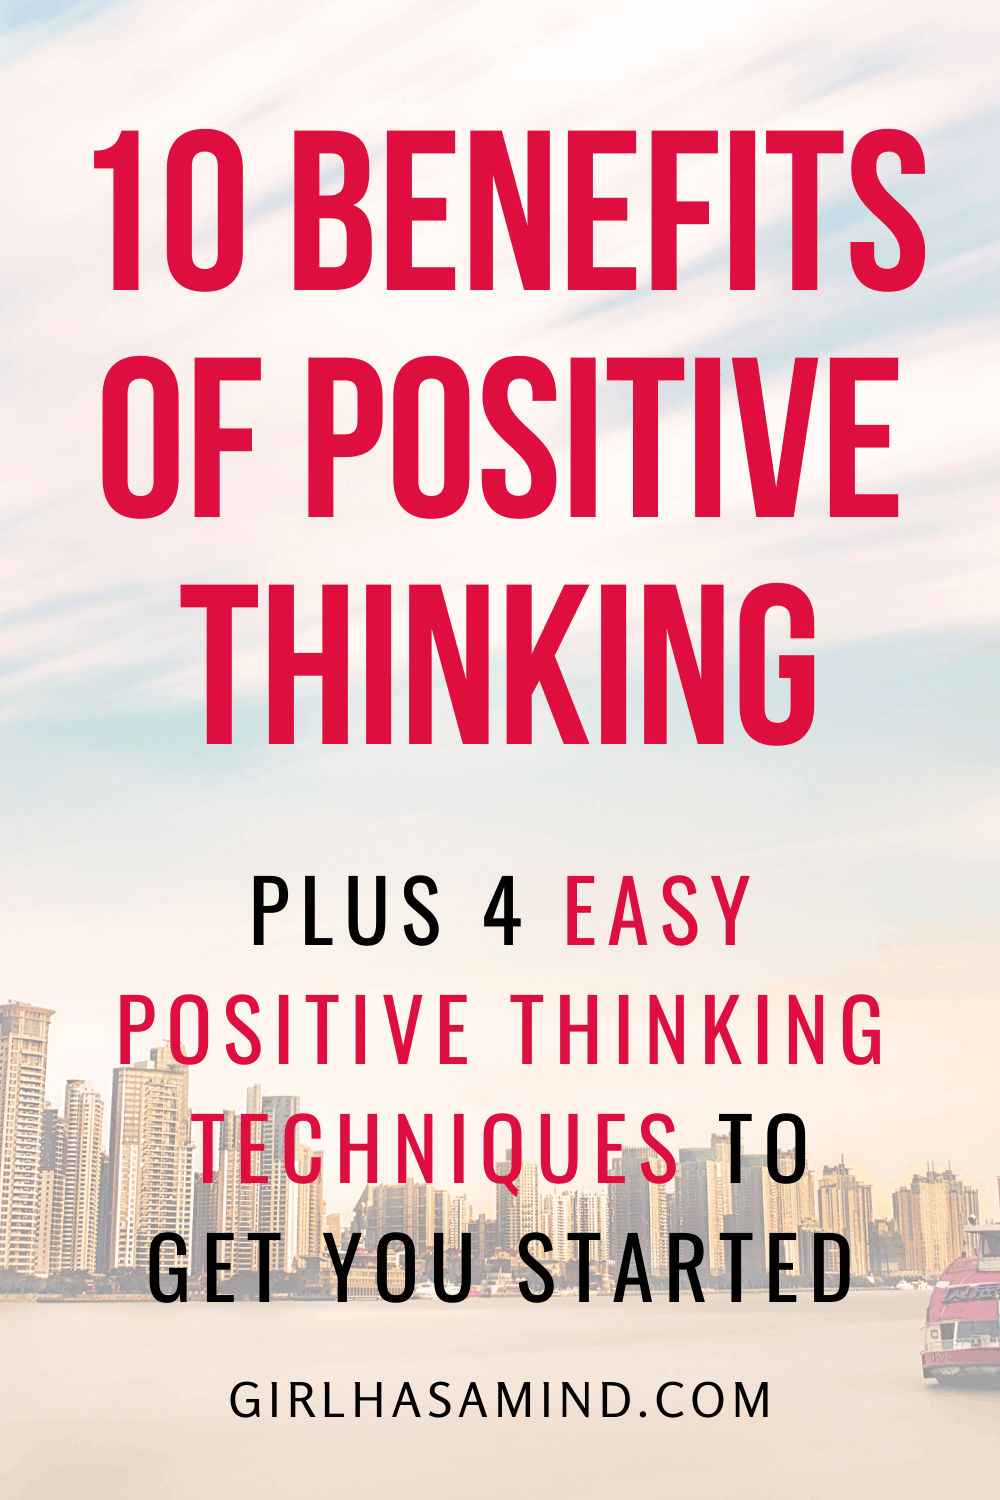 Positive thinking techniques